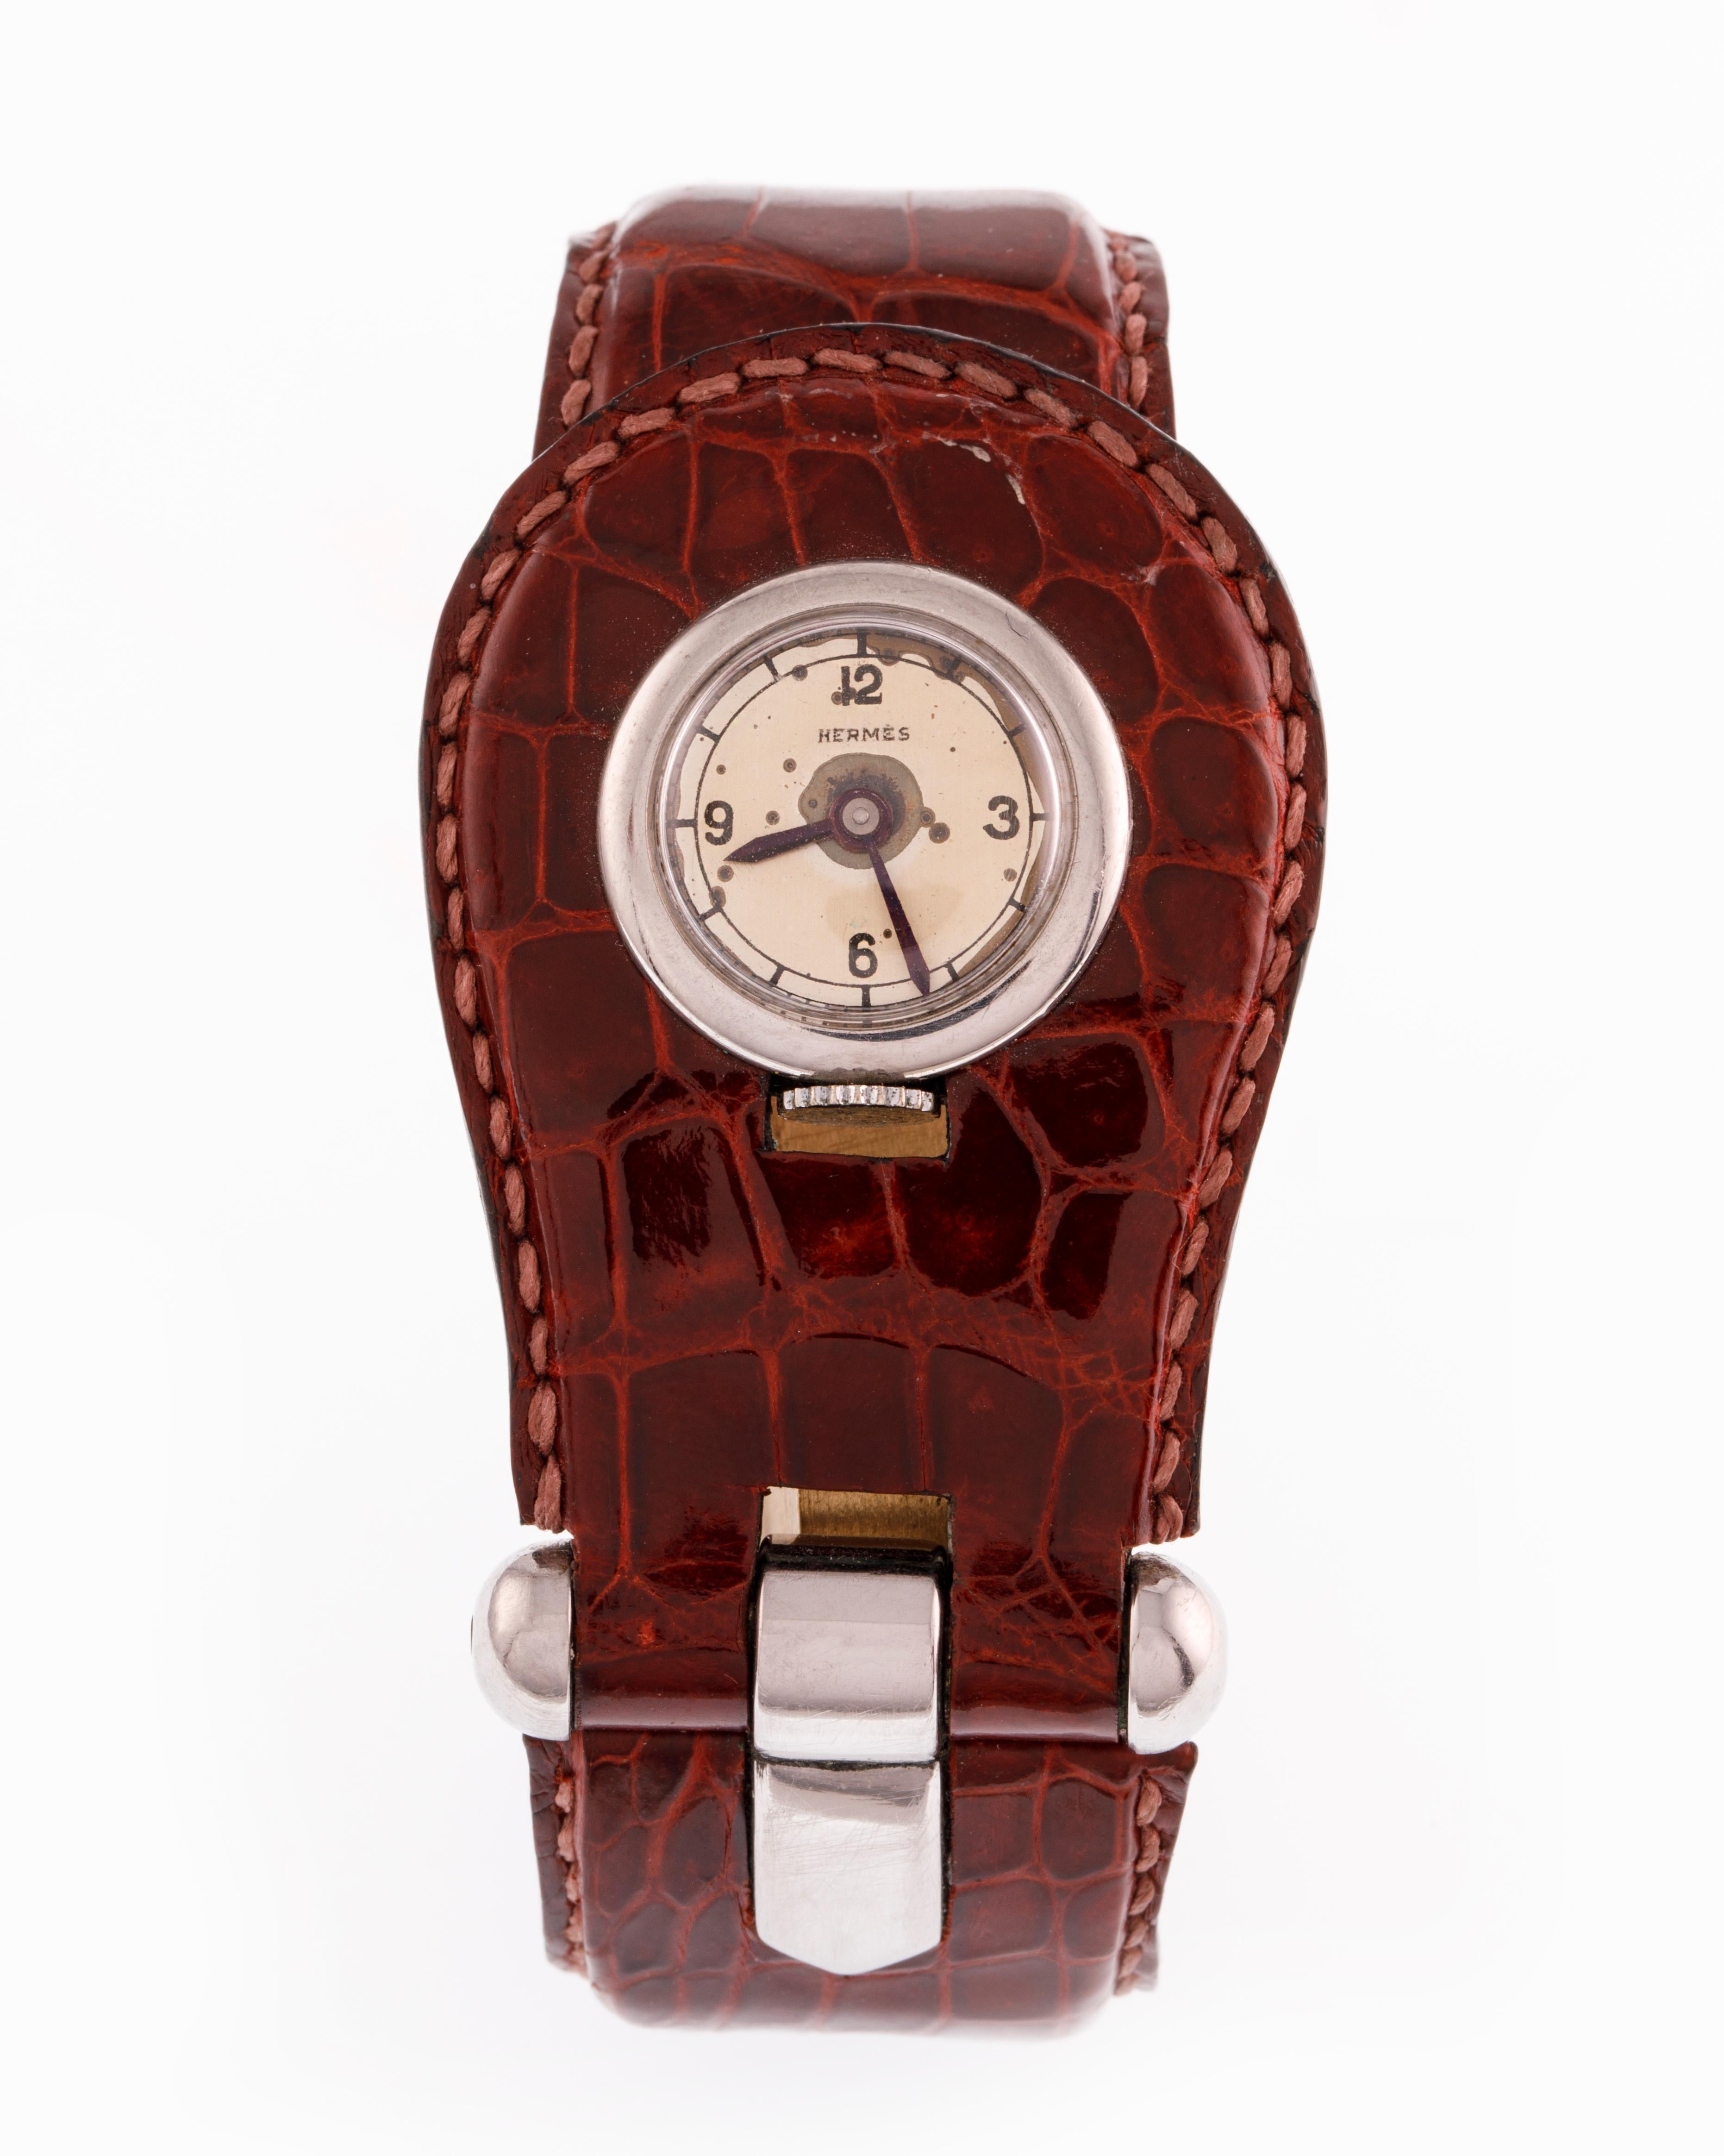 This particular designed watch is one of the most unique accessories designed by Hermès. The bracelet, model 